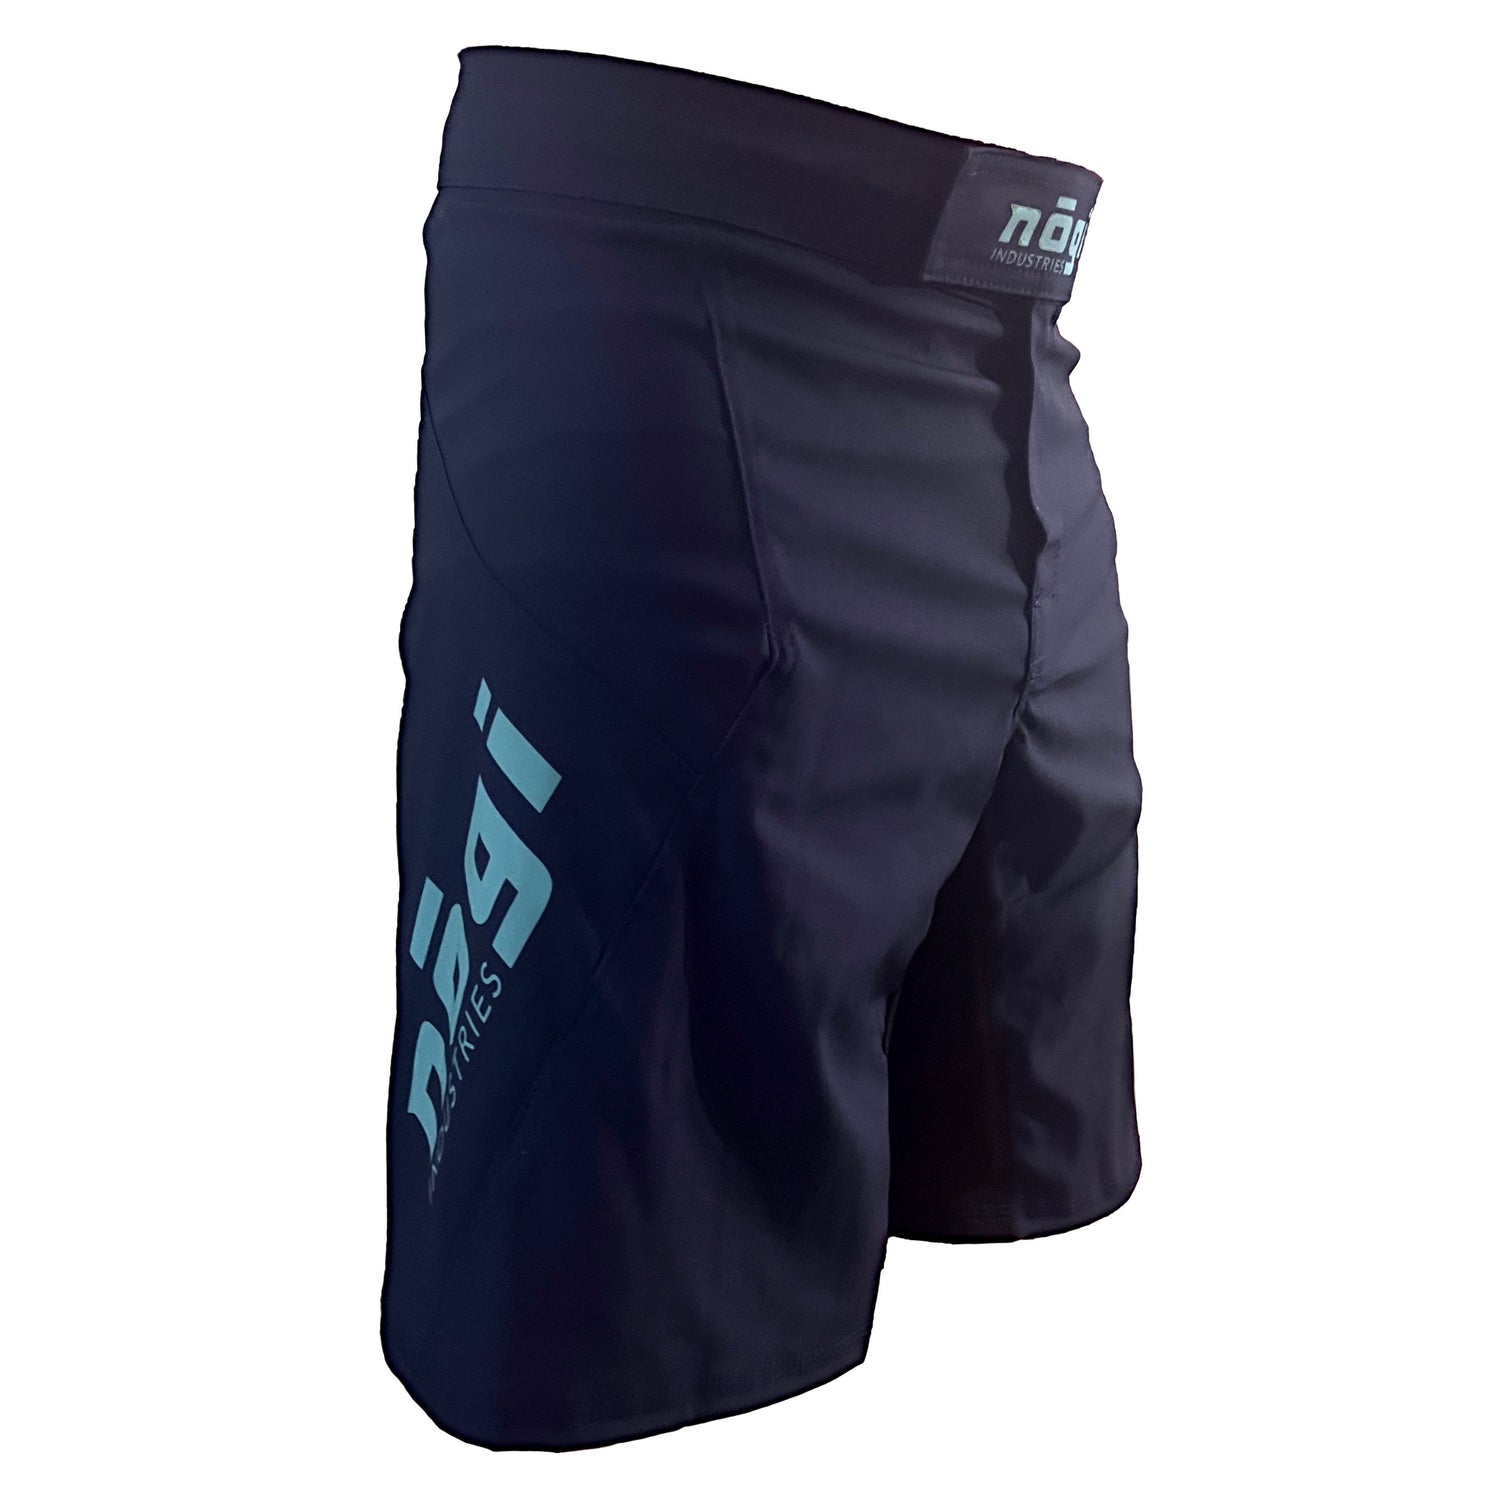 Phantom 4.0 Fight Shorts - Midnight Navy & Teal by Nogi Industries - MADE IN USA